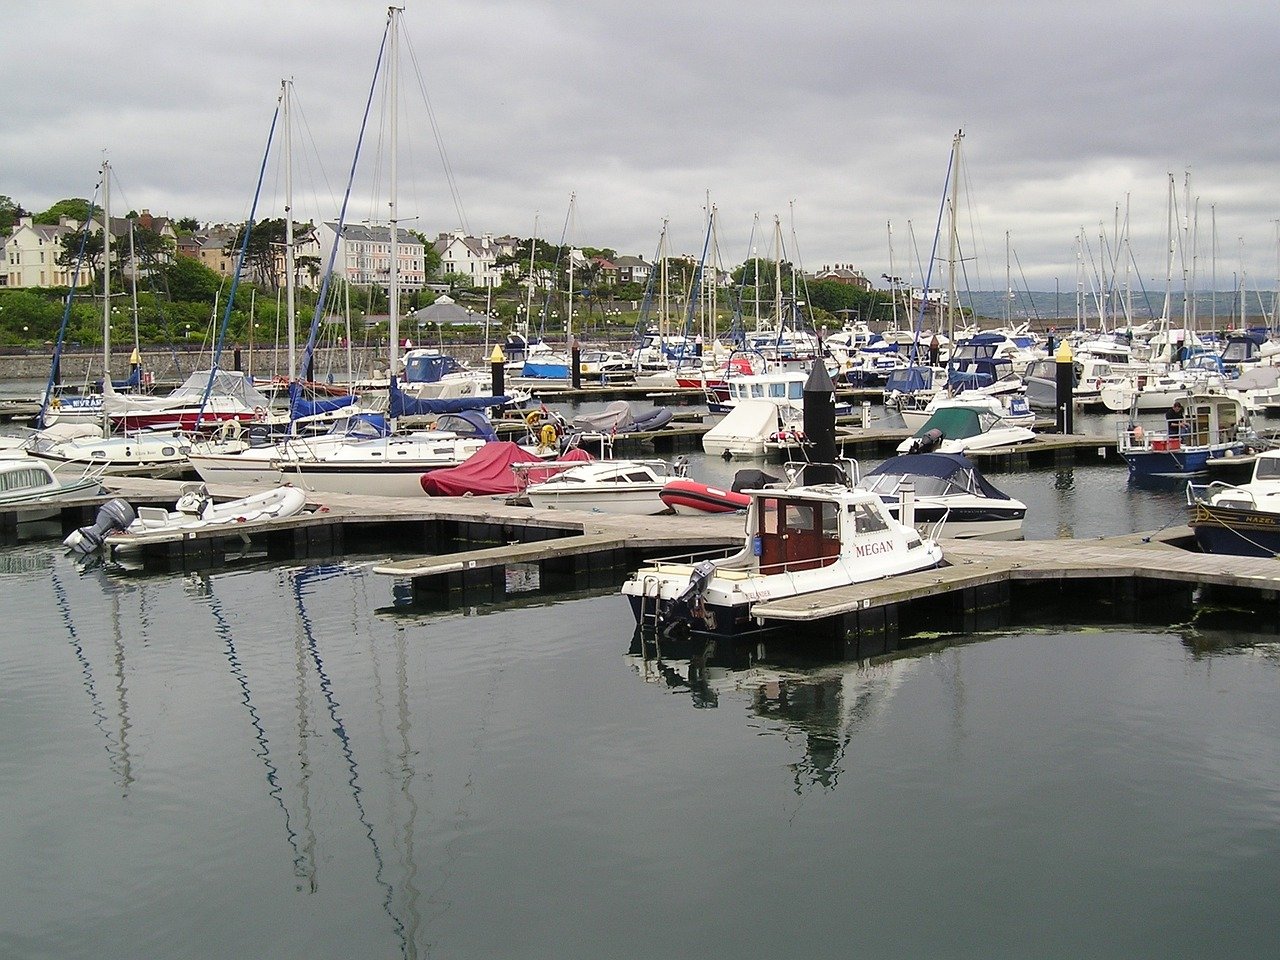 Bangor is a small city in the north of Wales. It has a population of about 59,000 people. It has two universities